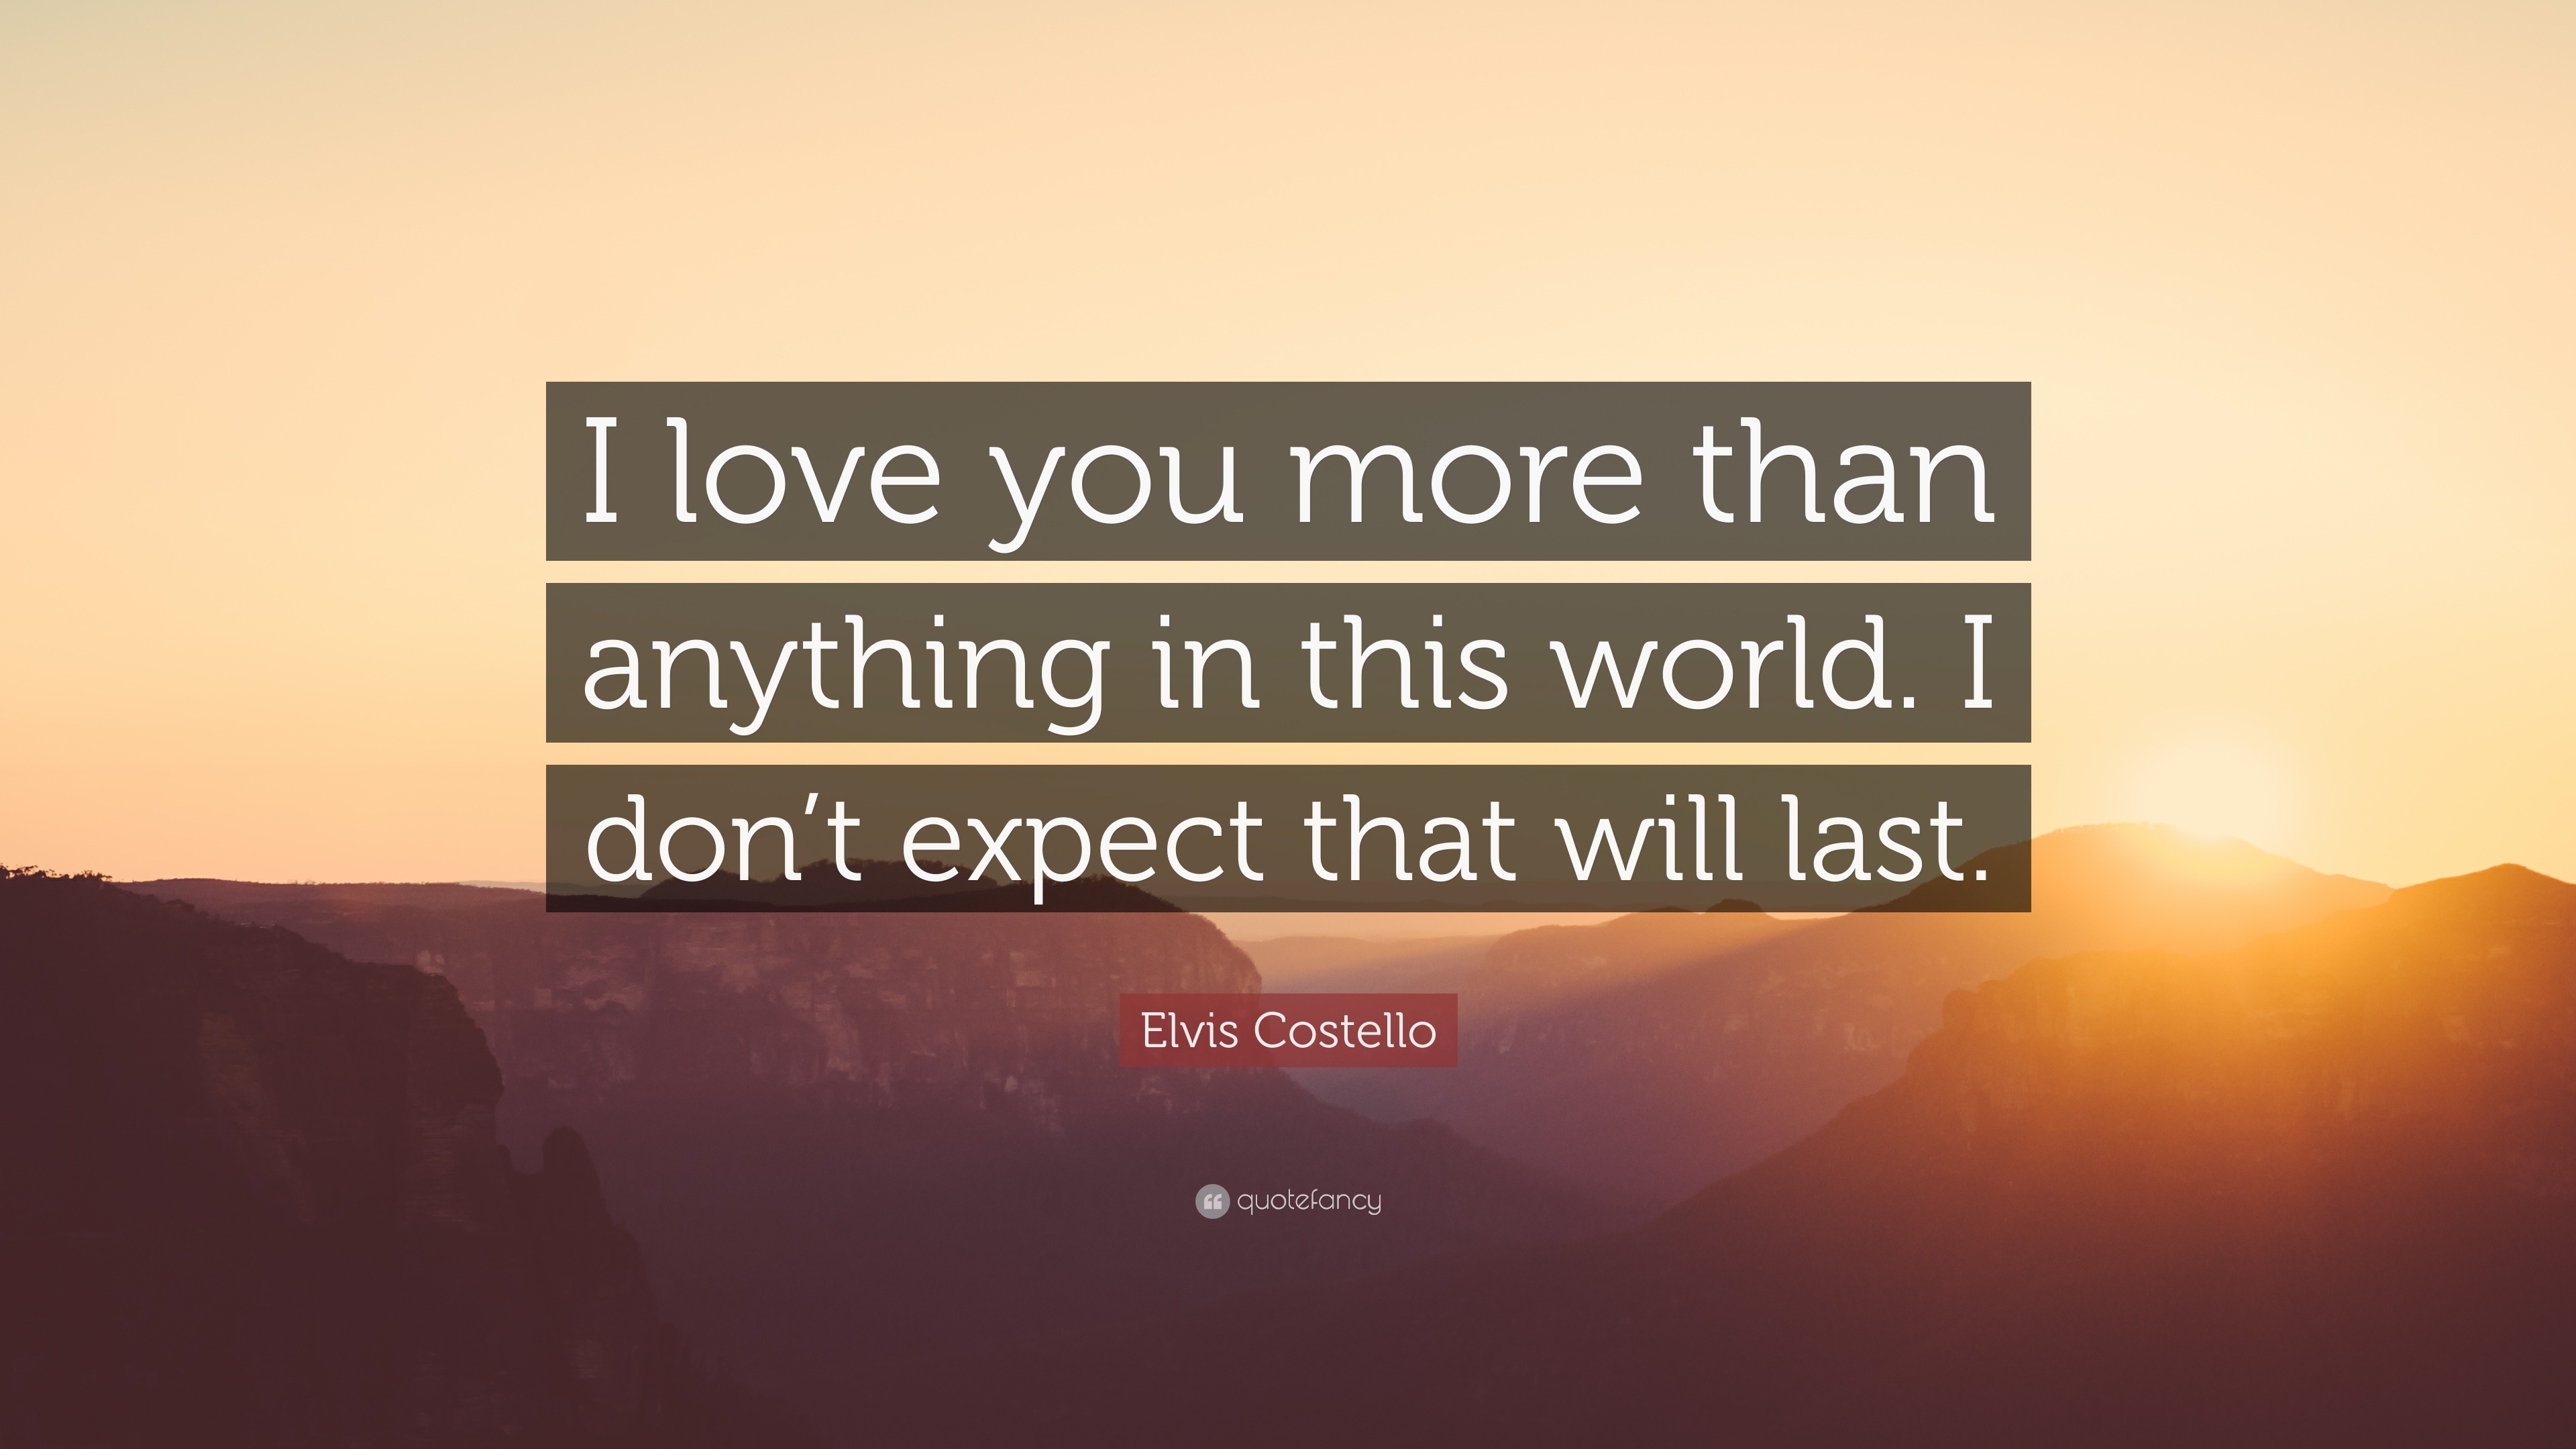 Elvis Costello Quote I Love You More Than Anything In This World I Don T Expect That Will Last 10 Wallpapers Quotefancy